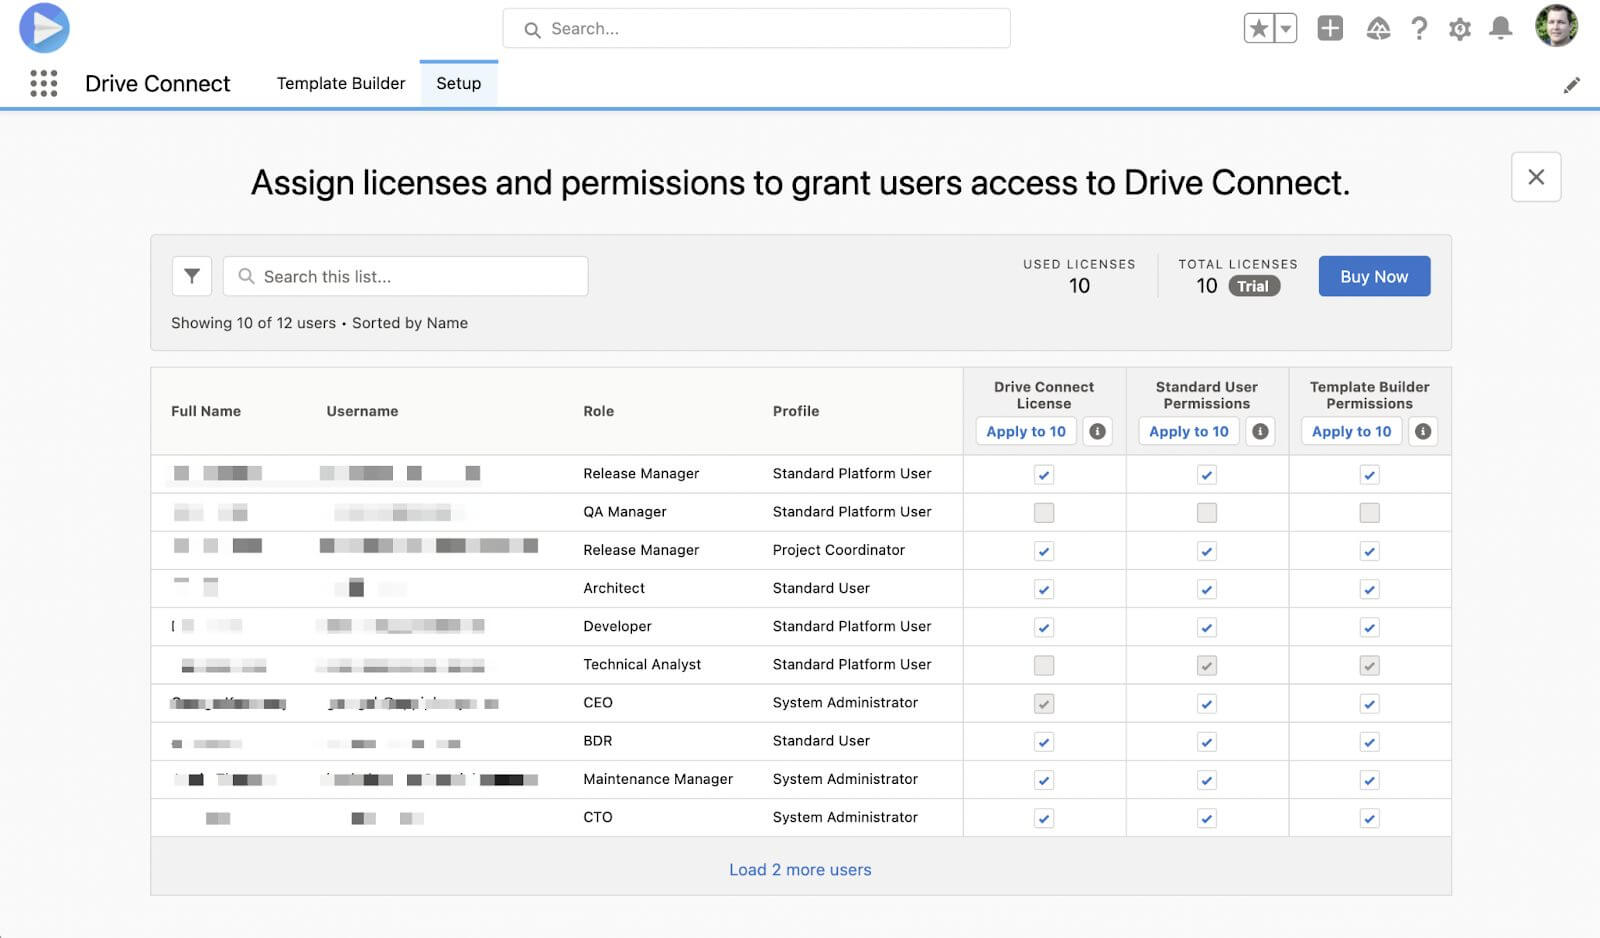 Assign licenses and permission sets